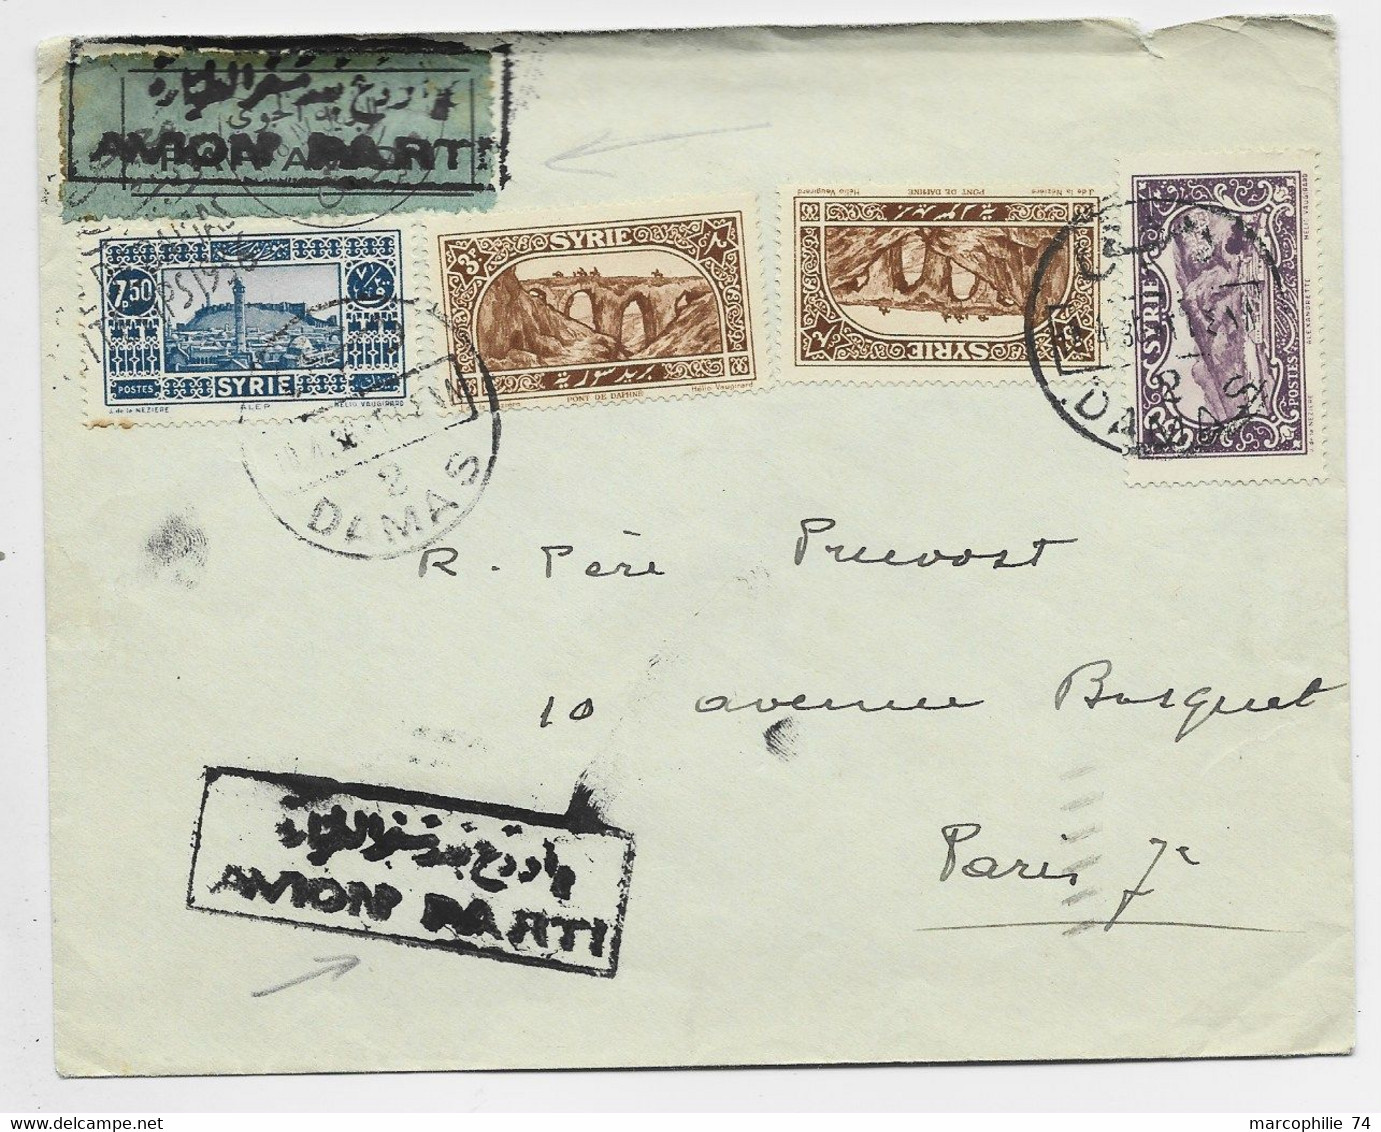 SYRIA SYRIE 3PX2+0.50+7P50 LETTRE COVER AVION DAMAS 1936  + VERSO OMAYAD HOTEL TO FRANCE + GRIFFE BILINGUE AVION PARTI - Syria